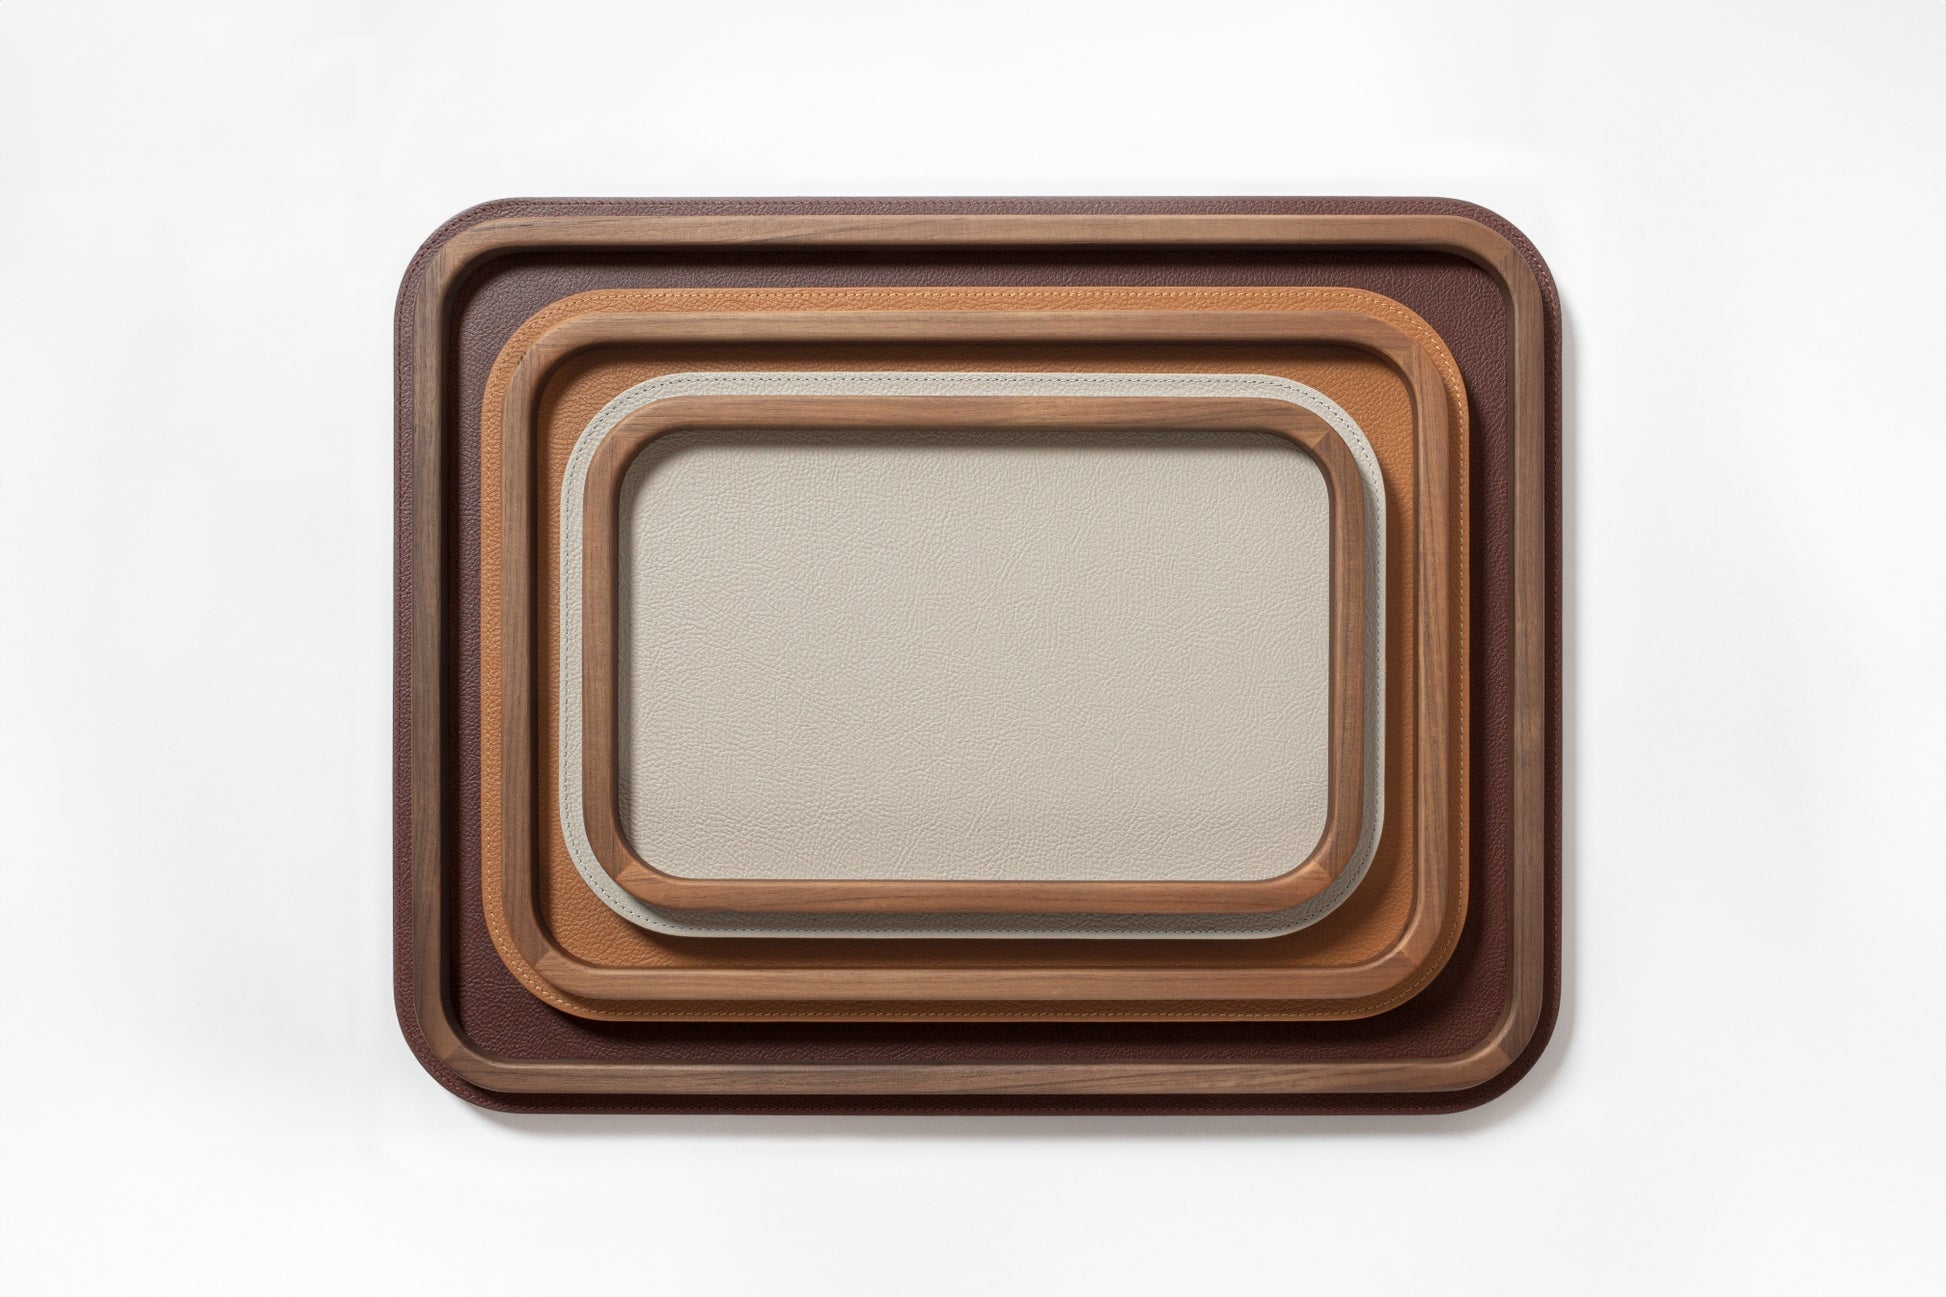 Giobagnara x Poltrona Frau Rectangular Rounded Tray with Wood Frame | Leather-Covered Trays with Rounded Corners | Walnut Wood Frame for Elegant Design | Explore a Range of Stylish Trays and Home Decor at 2Jour Concierge, #1 luxury high-end gift & lifestyle shop